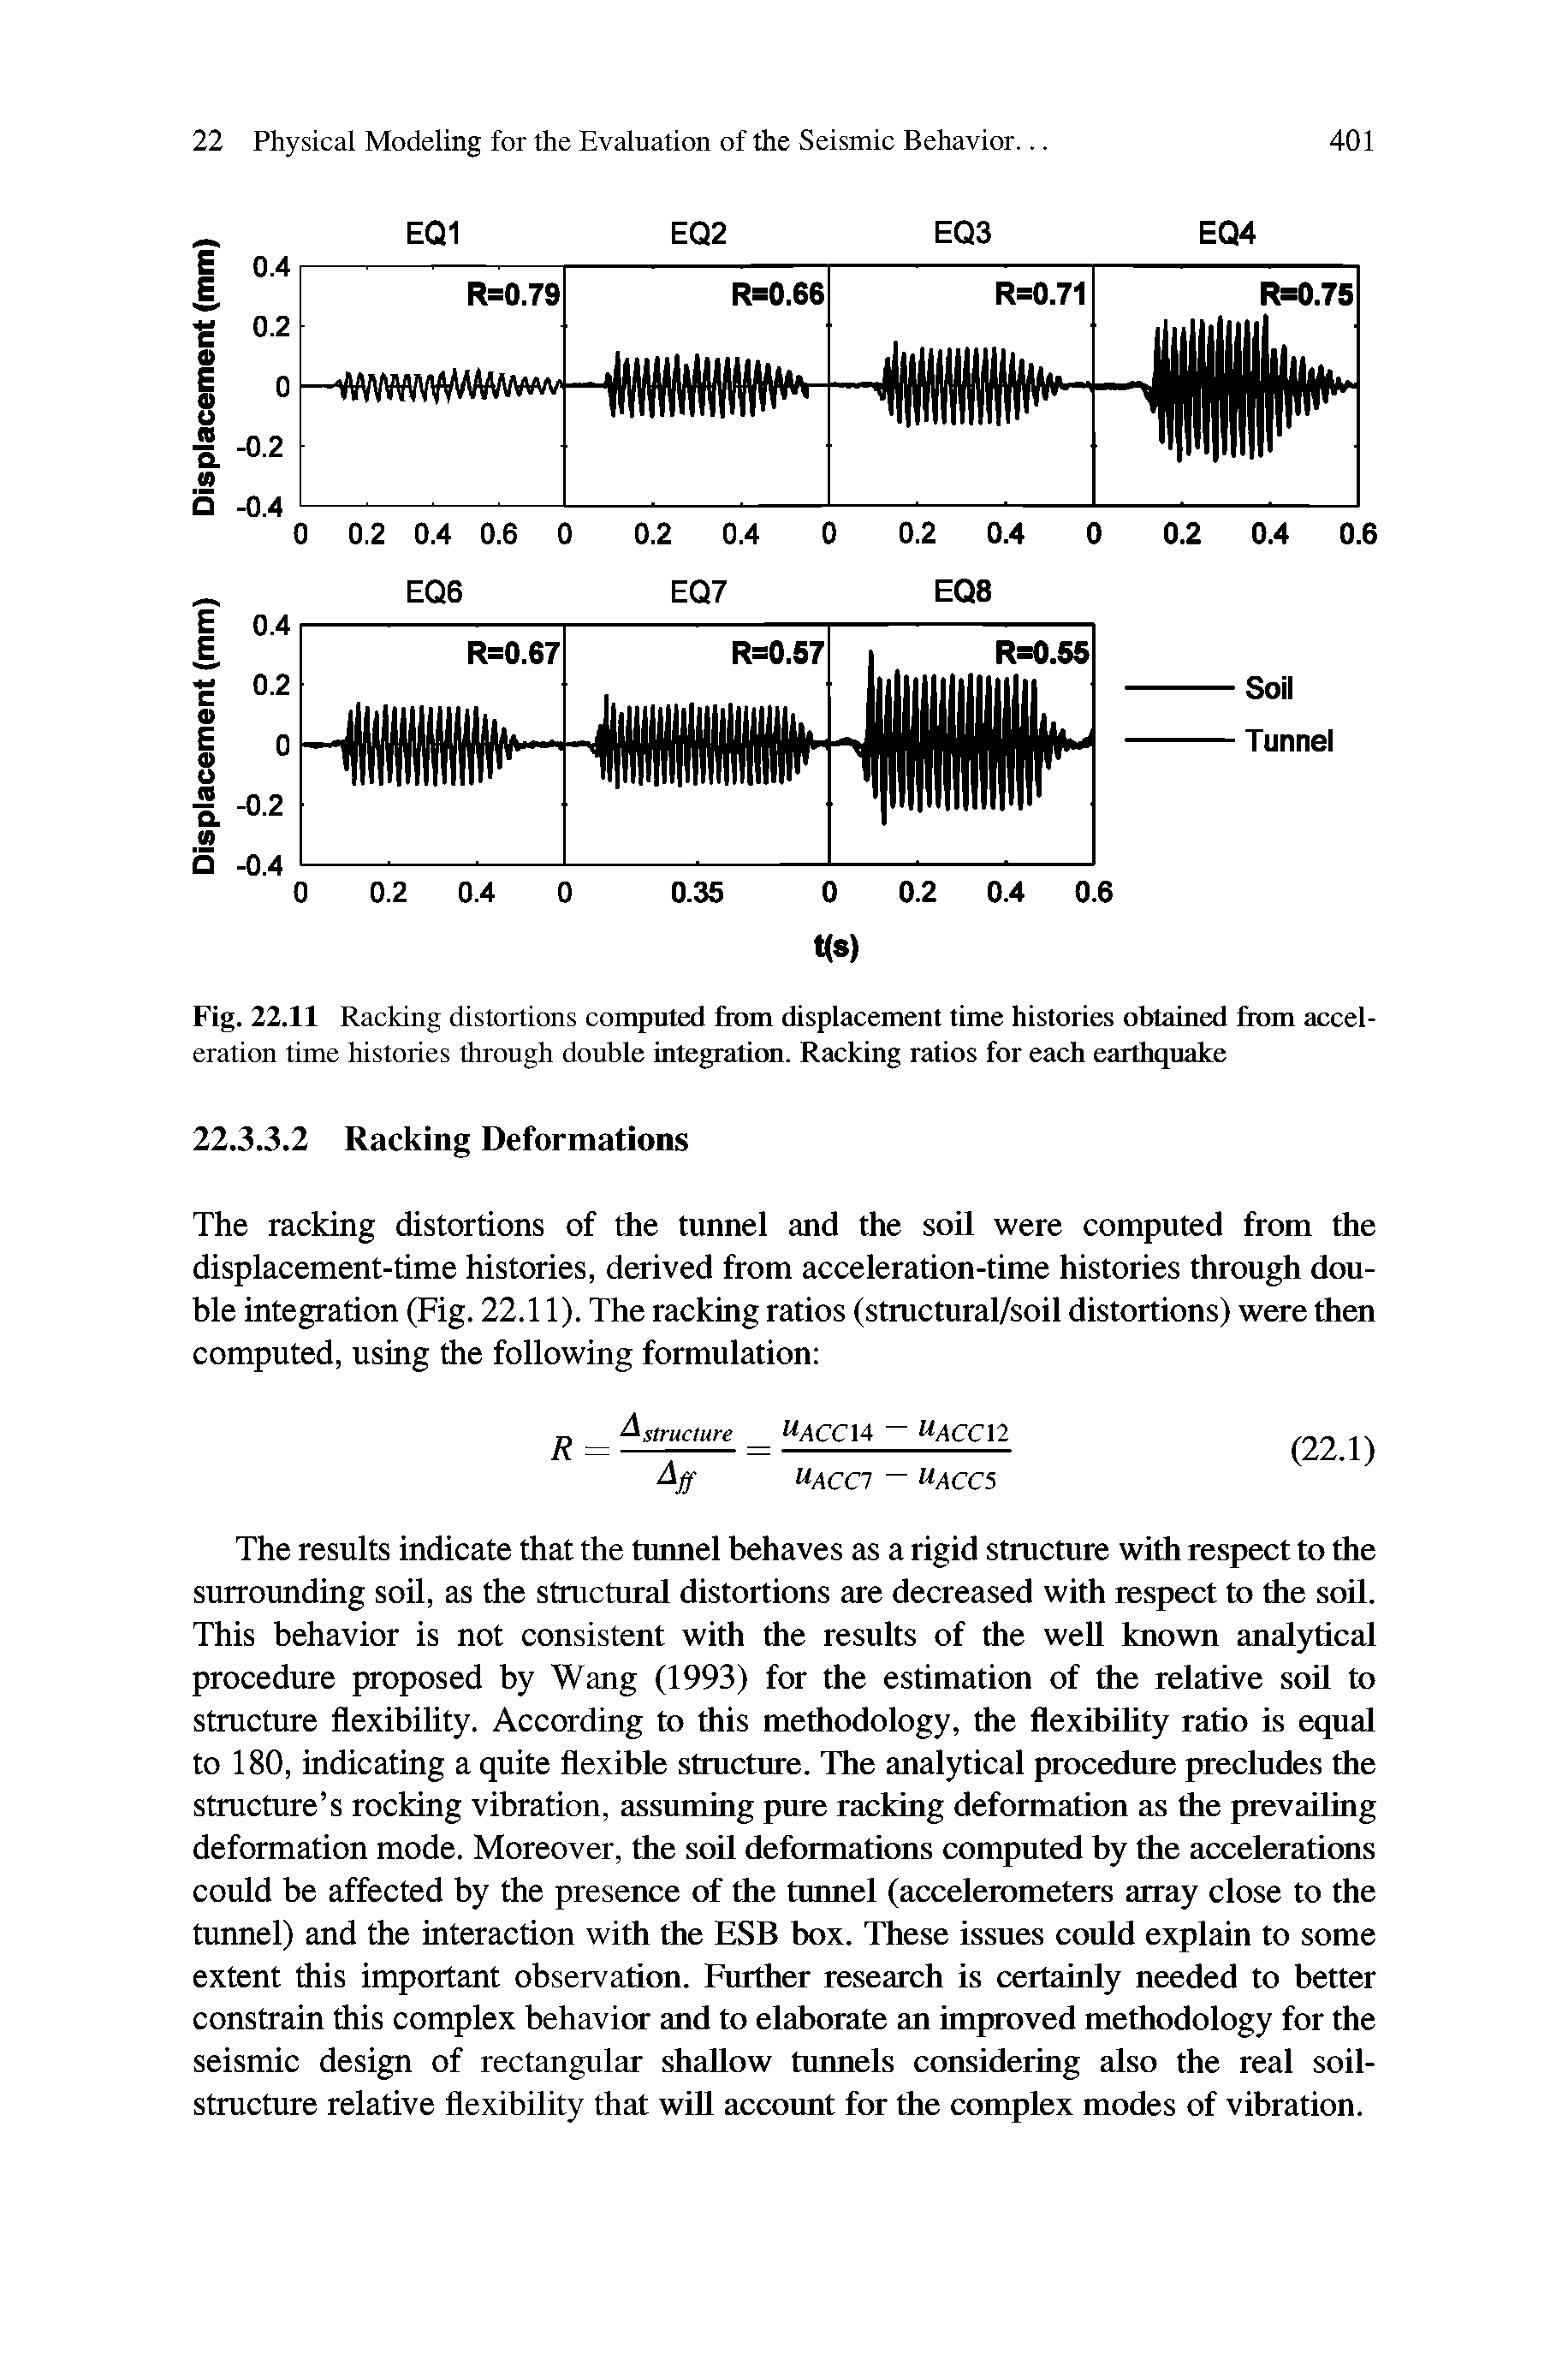 Fig. 22.11 Racking distortions computed from displacement time histories obtained from acceleration time histories through double integration. Racking ratios for each earthquake...